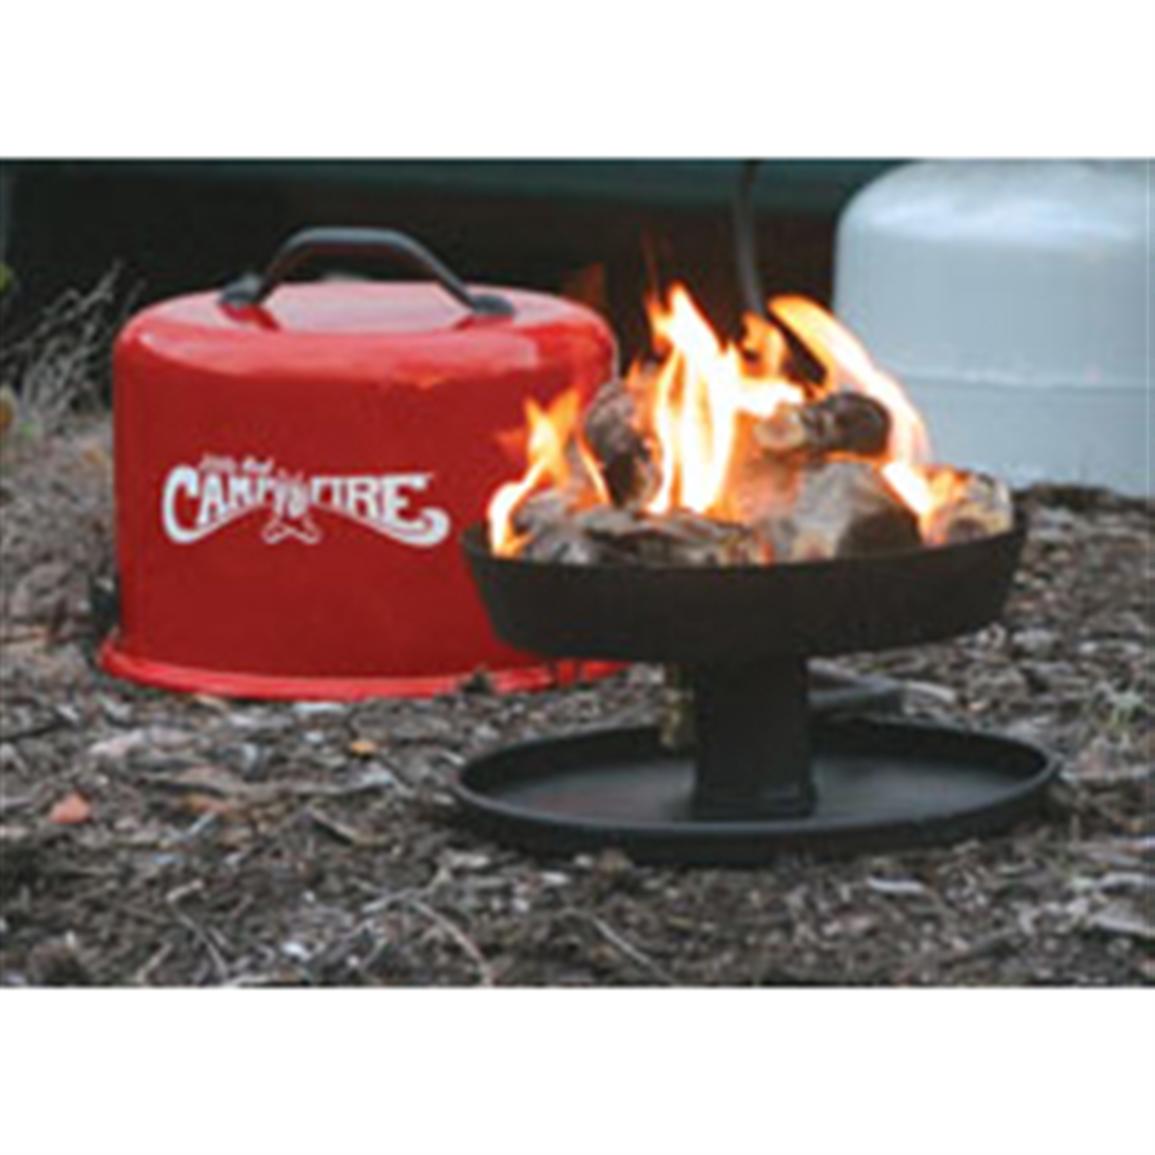 Camco® Little Red Campfire™ - 195100, Grills & Smokers at Sportsman's Guide